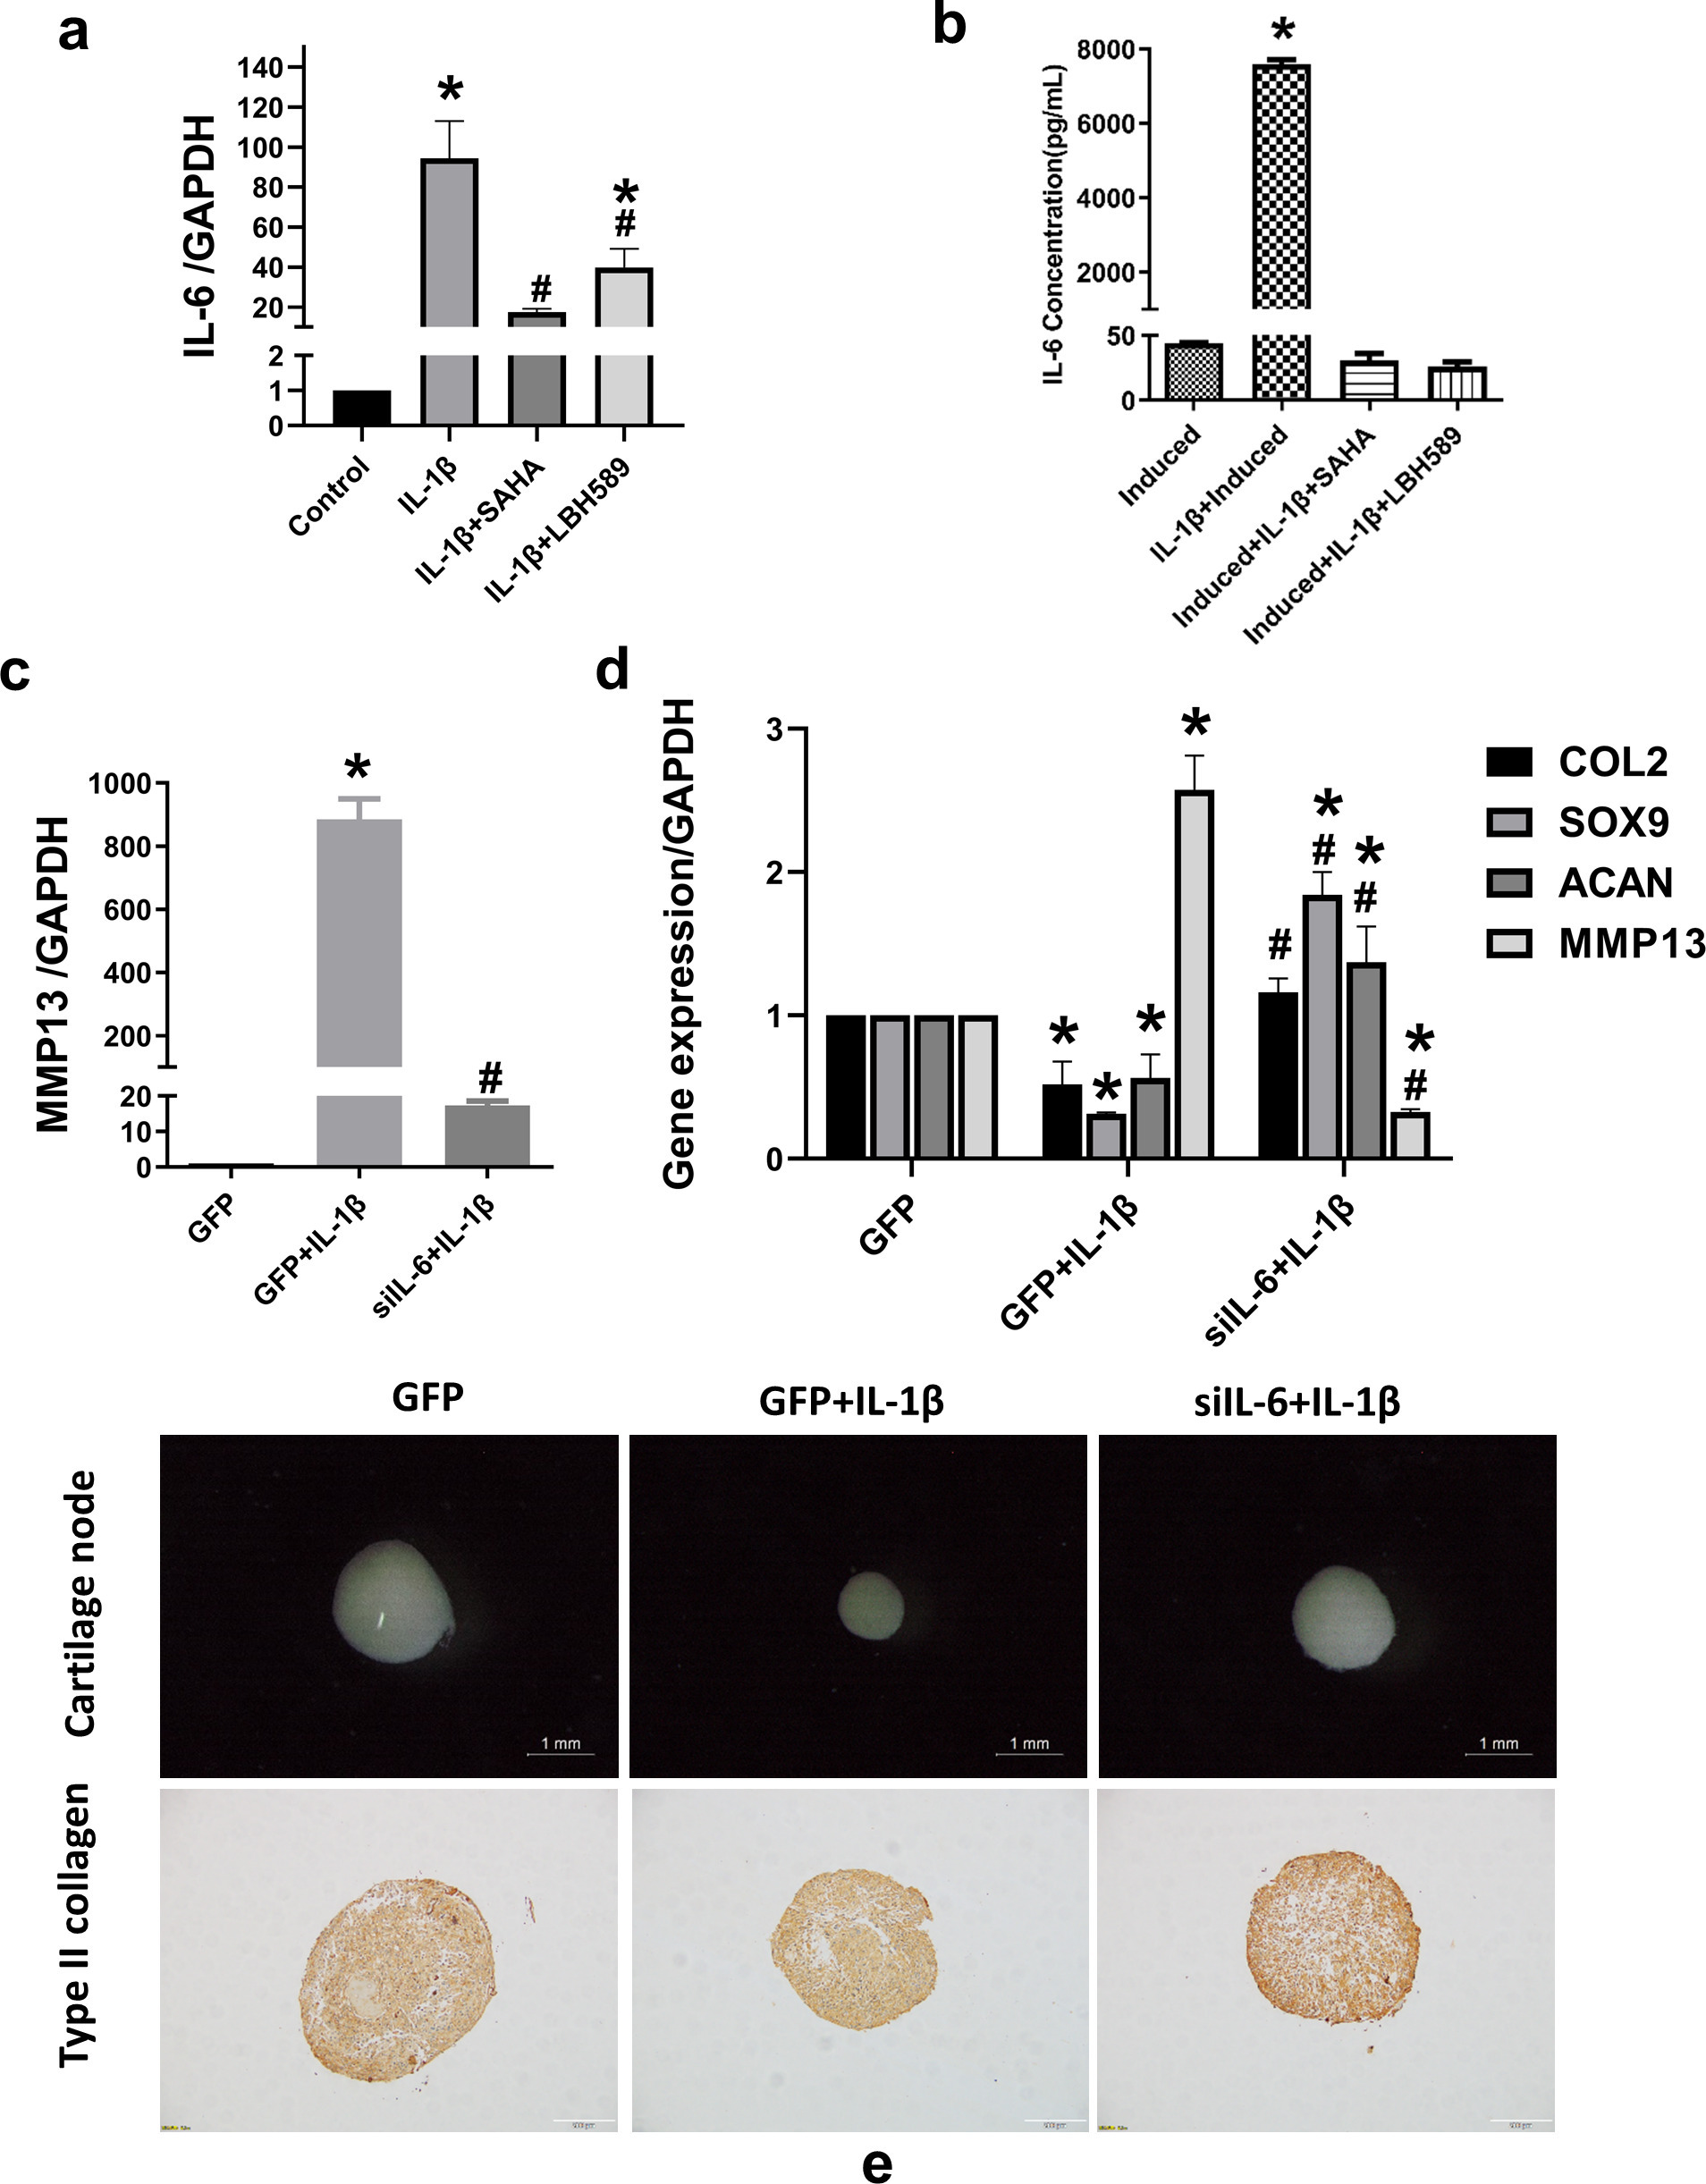 Fig. 4 
            Histone deacetylase (HDAC) inhibitors attenuate interleukin (IL)-6 contributing to the improvement of IL-1β-induced inhibition of chondrogenesis. a) After synovium-derived mesenchymal stem cells (SMSCs) were pre-treated with 10 μM suberoylanilide hydroxamic acid (SAHA) or 3 μM LBH589 for two hours and then treated with 10 ng/ml IL-1β for 24 hours, RNA was extracted. Reverse transcription-quantitative polymerase chain reaction (RT-qPCR) was used to evaluate IL-6 messenger RNA (mRNA) expression; *p < 0.05 compared to the control group. #p < 0.05 compared to the IL-1β-treated group, n = 3. b) Secretion of IL-6 in the supernatant of chondrogenic induction medium, as detected by a cytometric bead array (CBA). c) The expression levels of matrix metalloproteinase 13 (MMP13) were detected after SMSCs were pre-transfected with the empty GFP vector or the knock-down IL-6 GFP vector for 48 hours and then co-treated with 10 ng/ml IL-1β for 24 hours, as detected by RT-qPCR and CBA. d) mRNA expression of type II collagen (COL2), SRY-box transcription factor 9 (SOX9), aggrecan (ACAN), MMP13, and IL-6, as estimated by RT-qPCR after chondrogenic induction; *p < 0.05 compared to the GFP group. #p < 0.05 compared to the GFP+IL-1β group. e) The size of the cartilage pellets, as estimated by stereoscopic microscopy. Scale bar = 1 mm. Immunohistochemical staining of type II collagen in cartilage pellet sections. Scale bar = 100 μm. One-way analysis of variance was used to determine the p-values. Least-Significant Difference (LSD) test was used to analyze data with homogeneous variances, and Games-Howell test was used for data with non-homogeneous variances. GAPDH, glyceraldehyde-3-phosphate dehydrogenase.
          